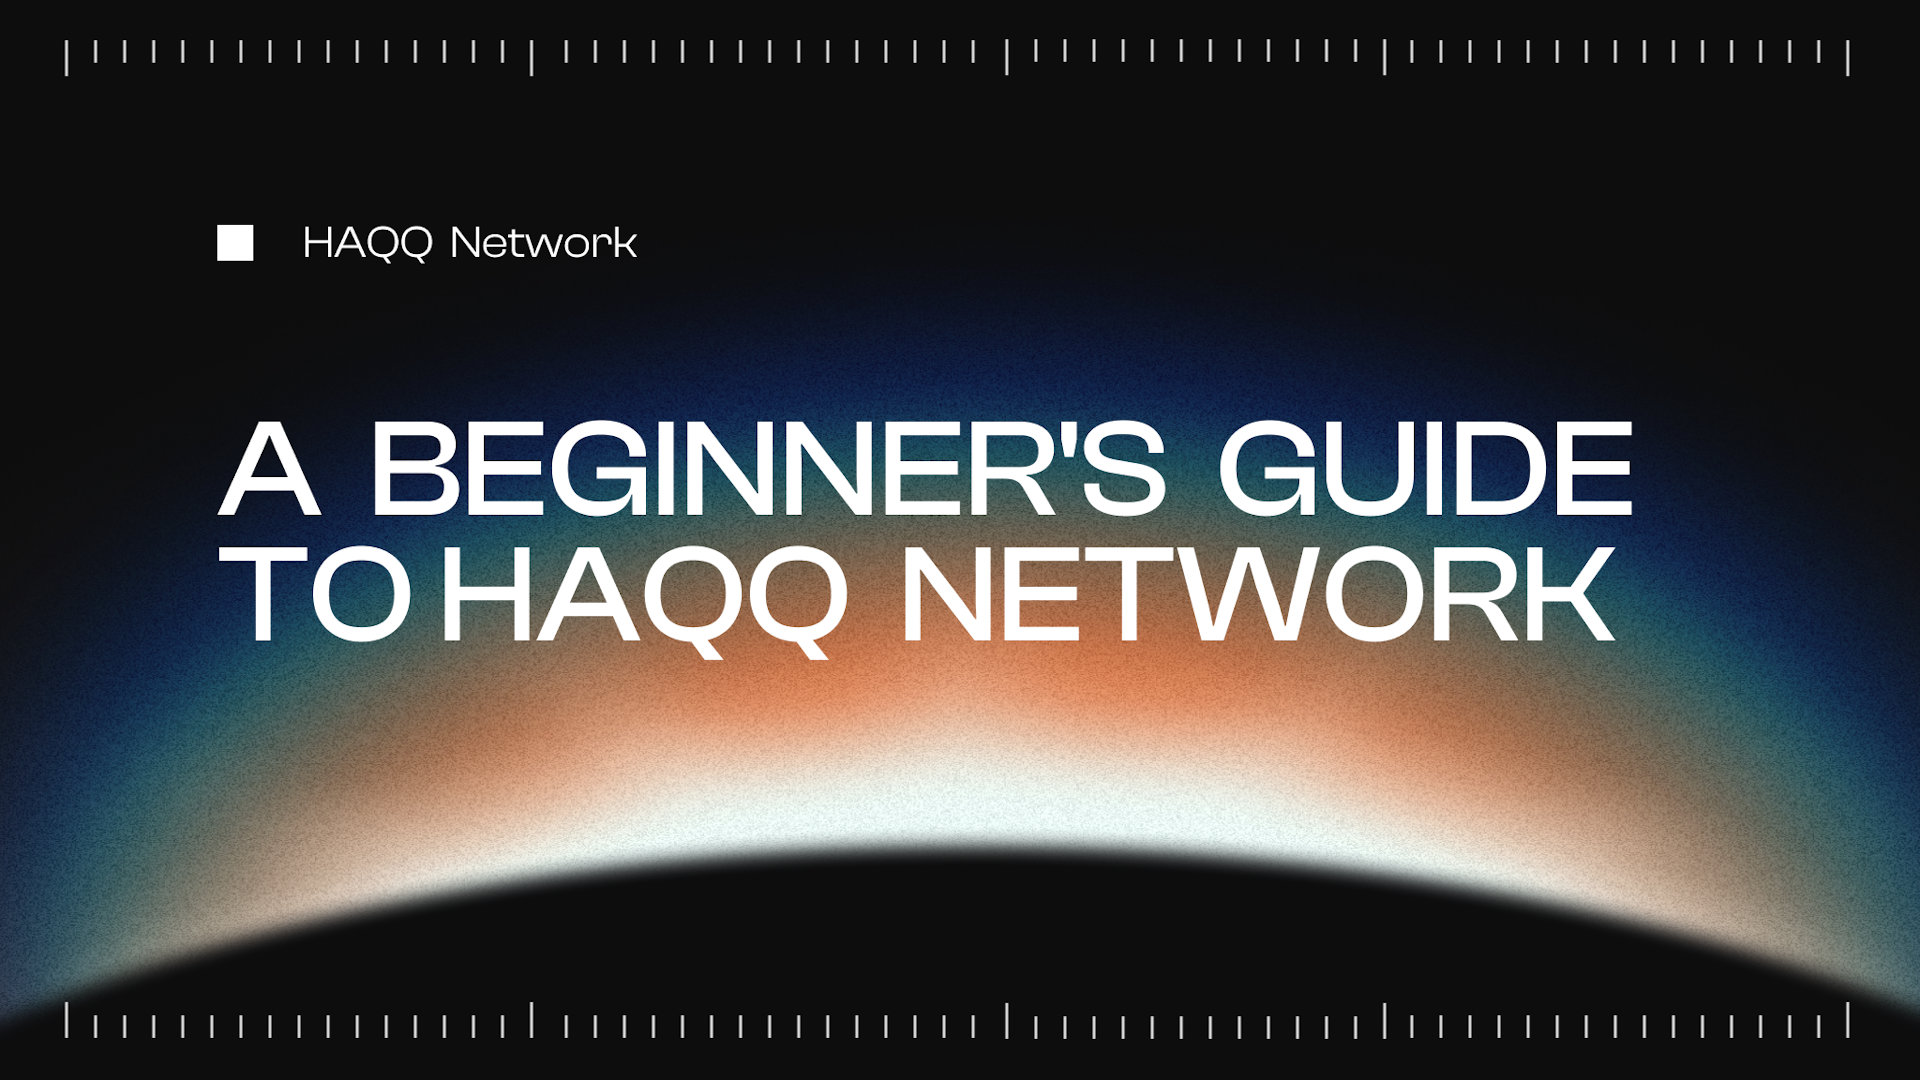 A Beginner's Guide to HAQQ Network